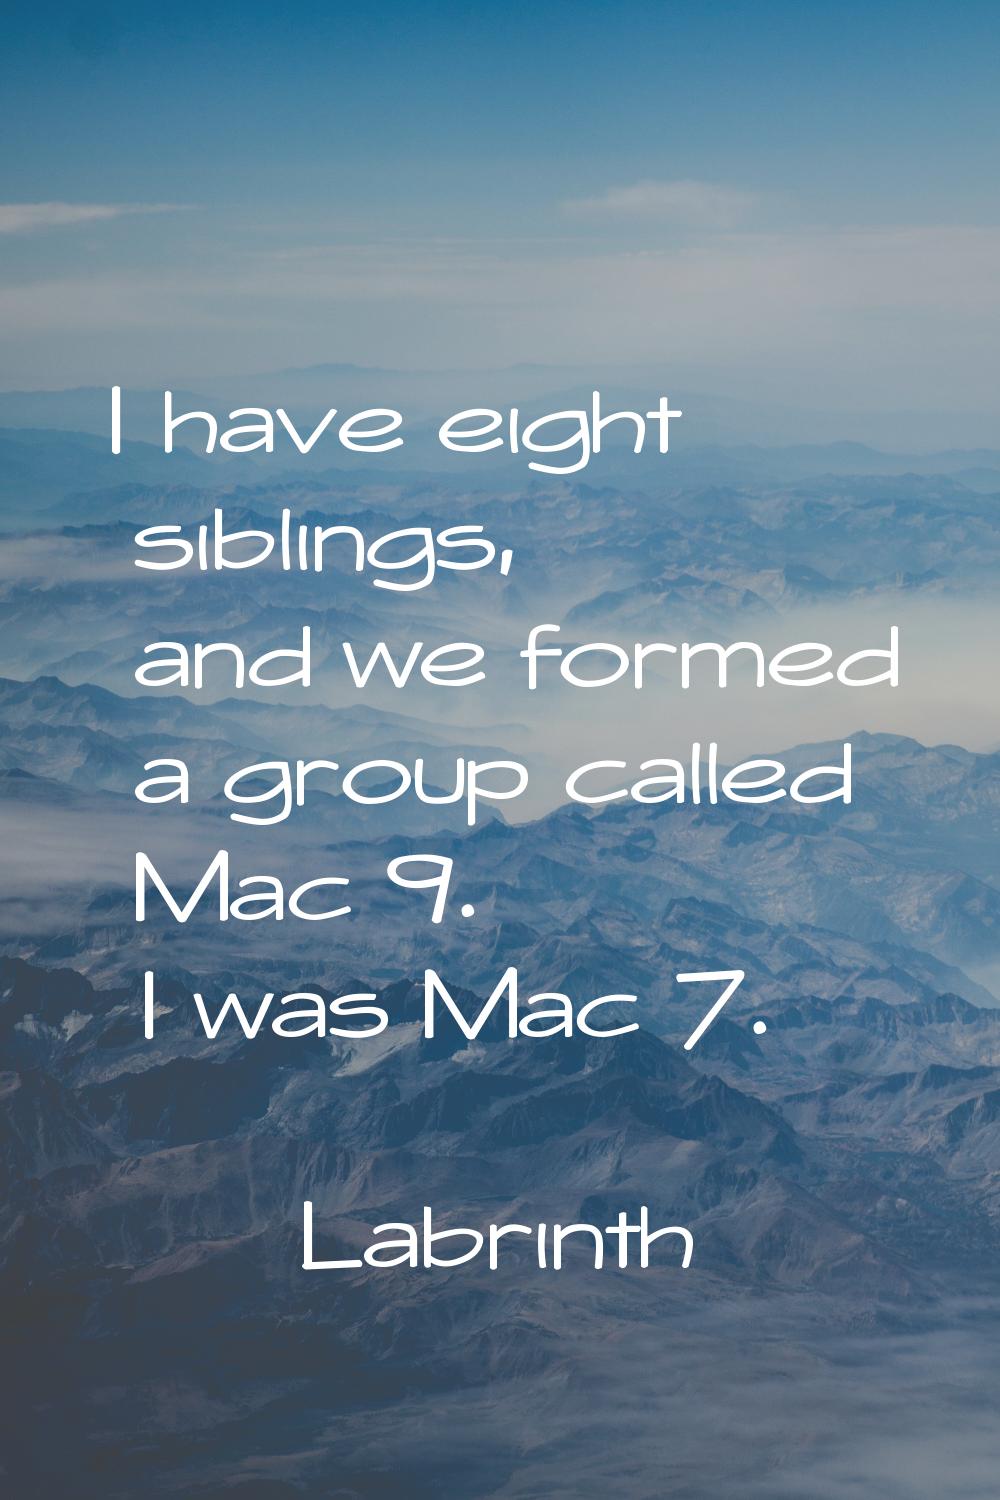 I have eight siblings, and we formed a group called Mac 9. I was Mac 7.